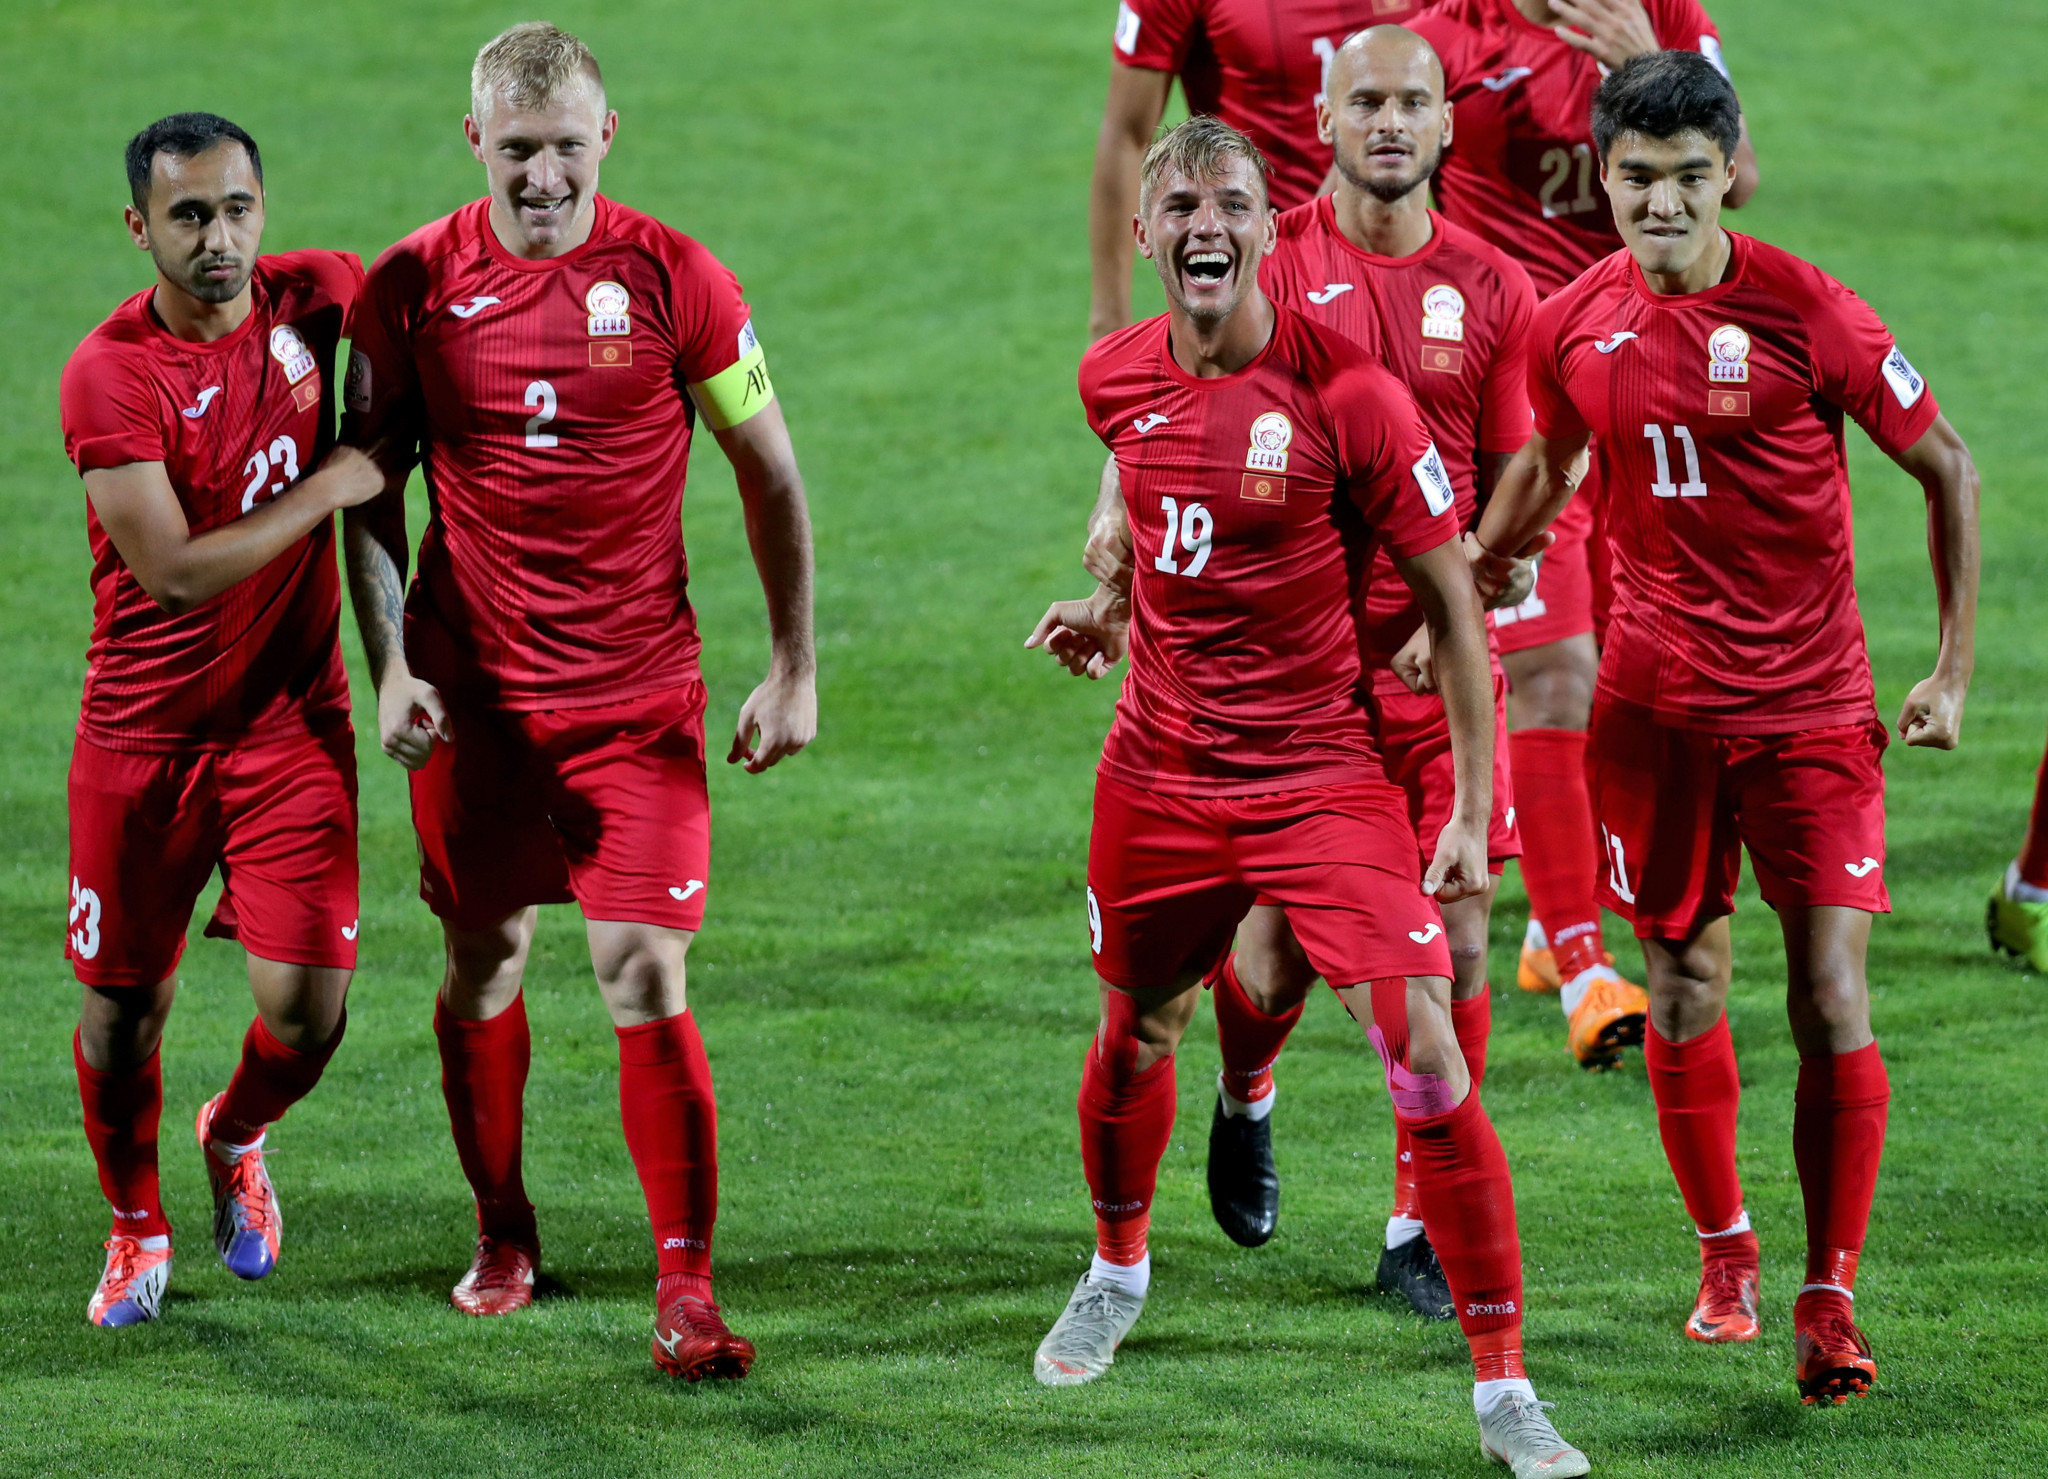 Kyrgyzstan celebrate getting their first AFC Asian Cup victory, with the team beating The Philippines 3-1 ©Getty Images